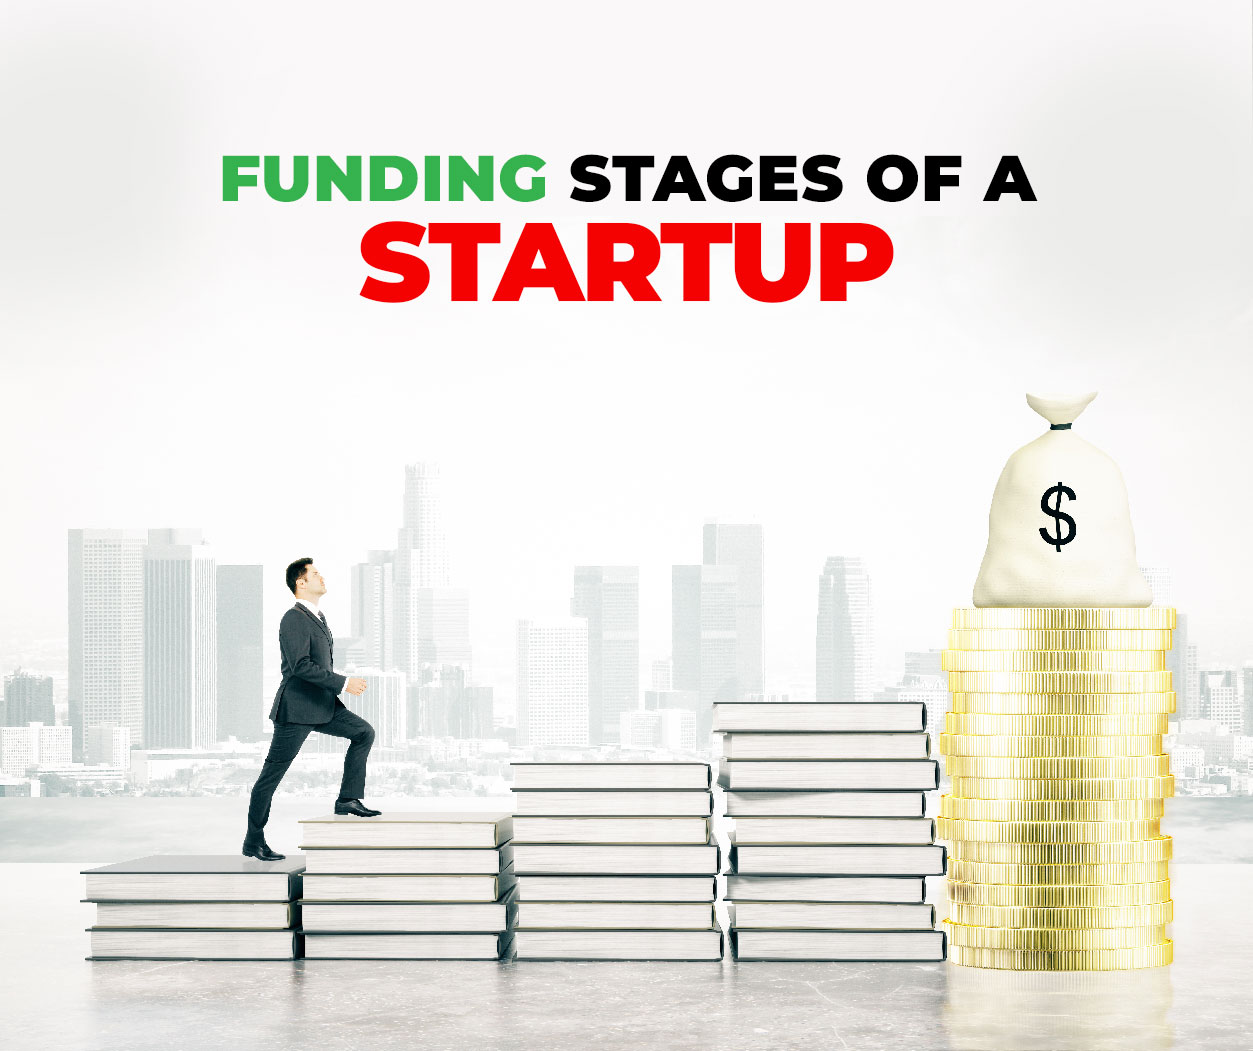 Funding Stages of a Startup Explained.